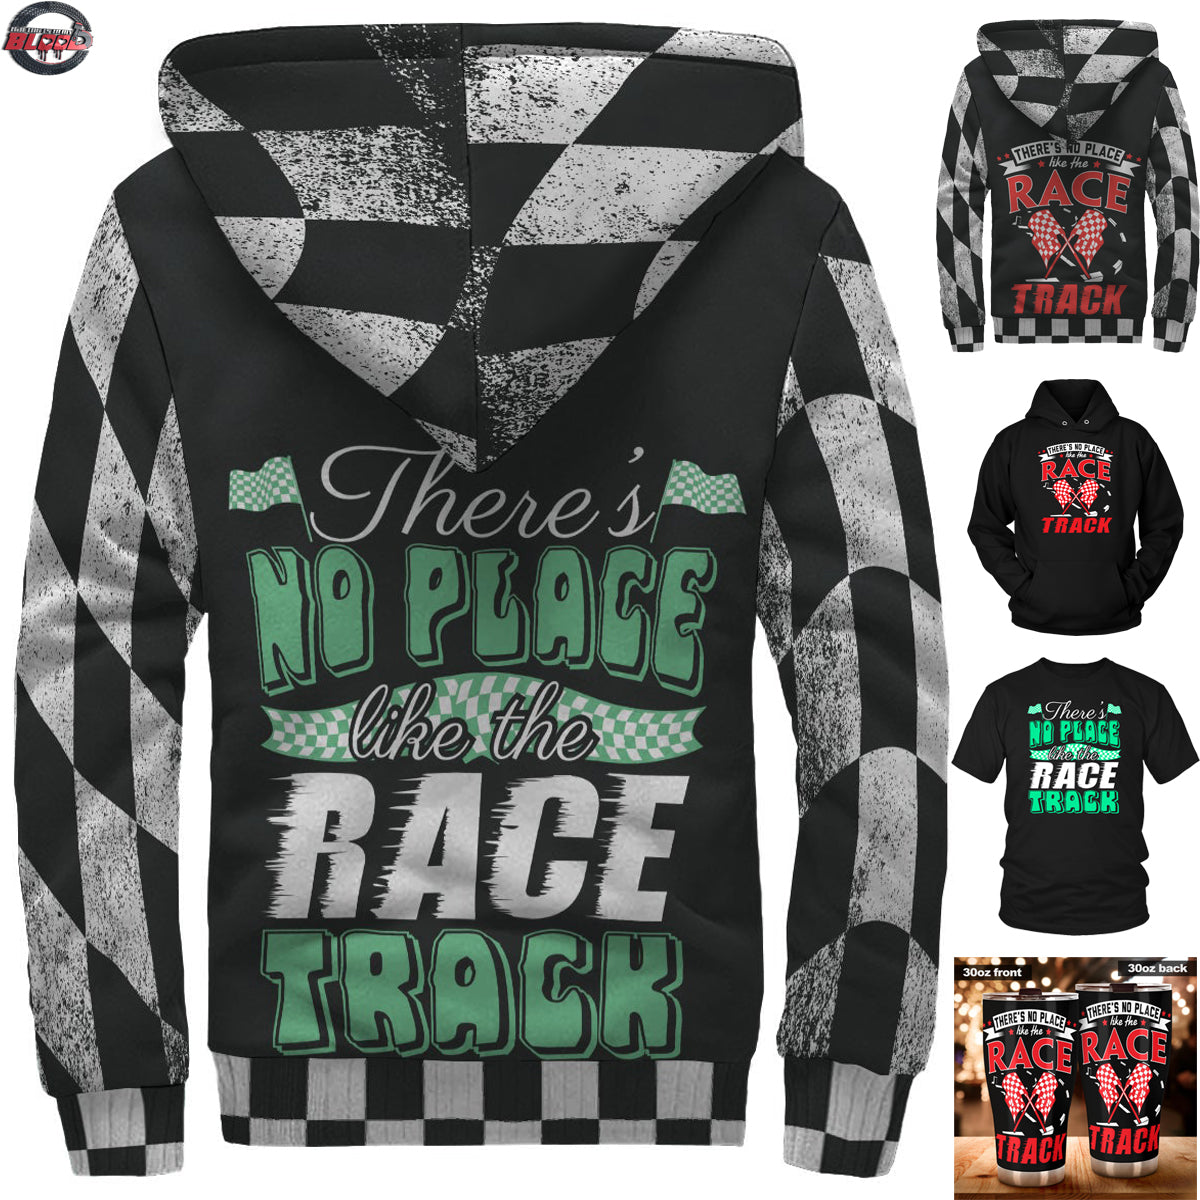 There's no place like the race track